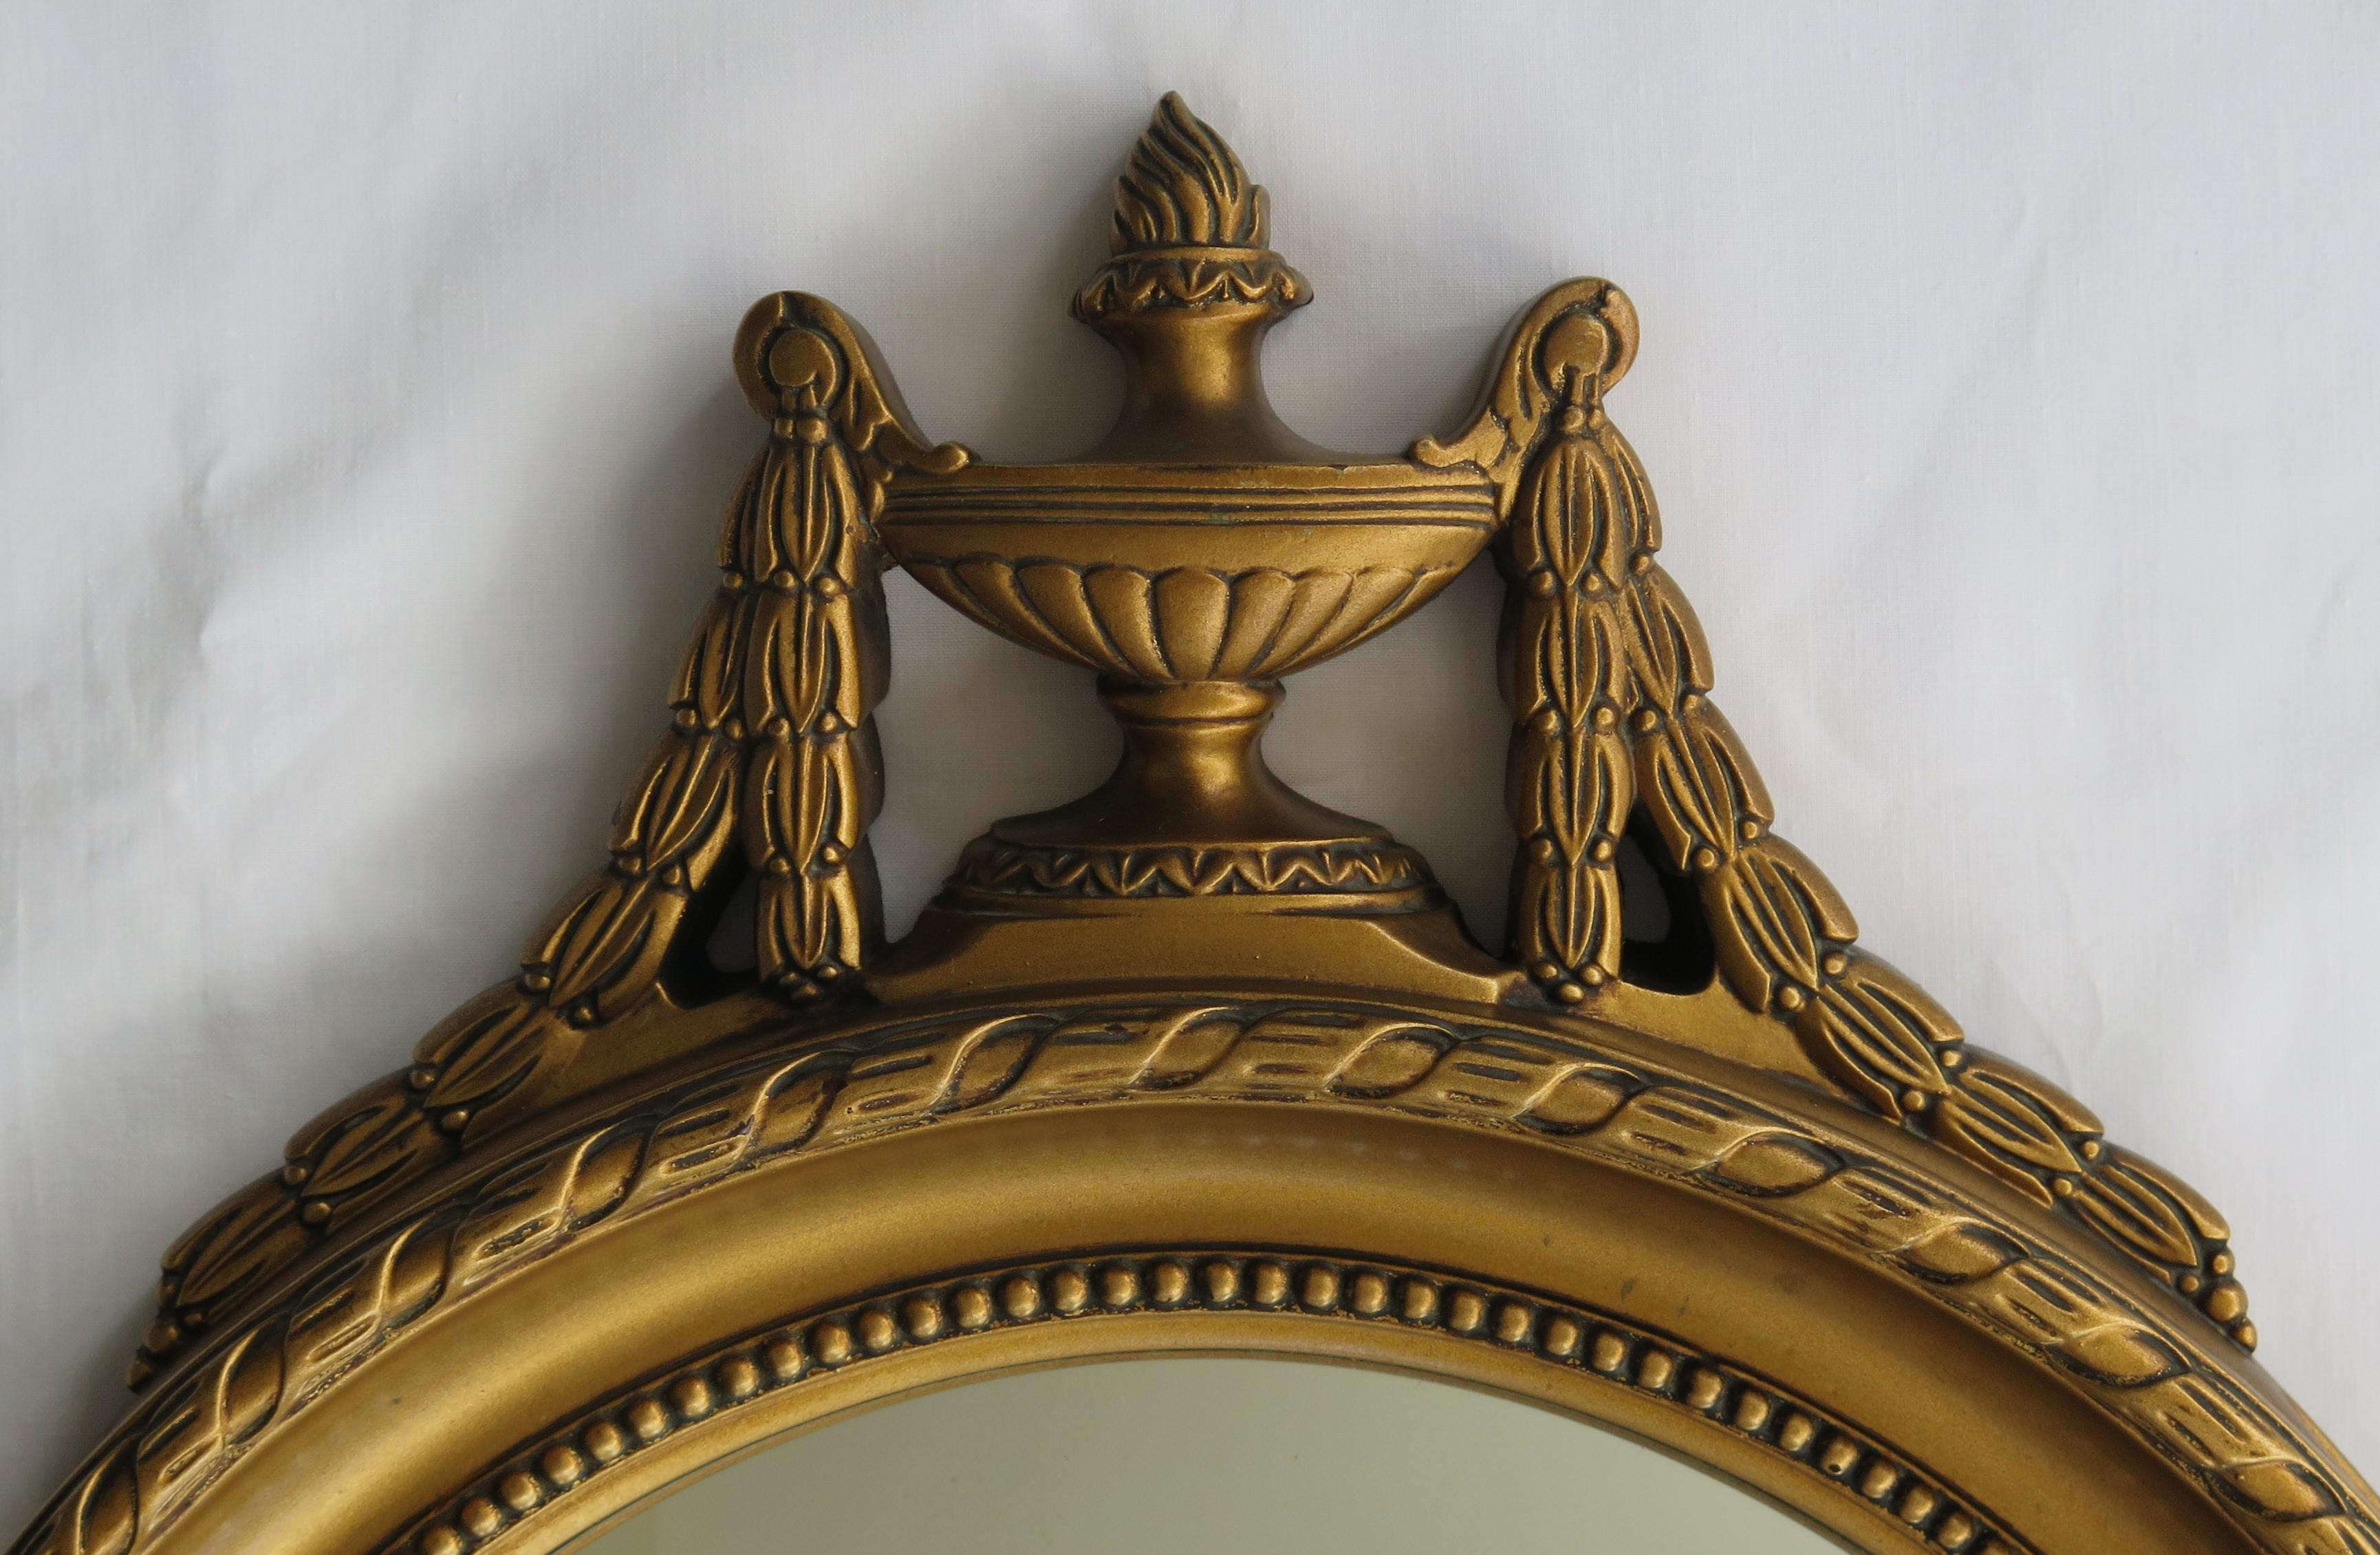 Empire Revival French Convex Wall Mirror in the Empire Style Gilt Wood, Circa 1930s